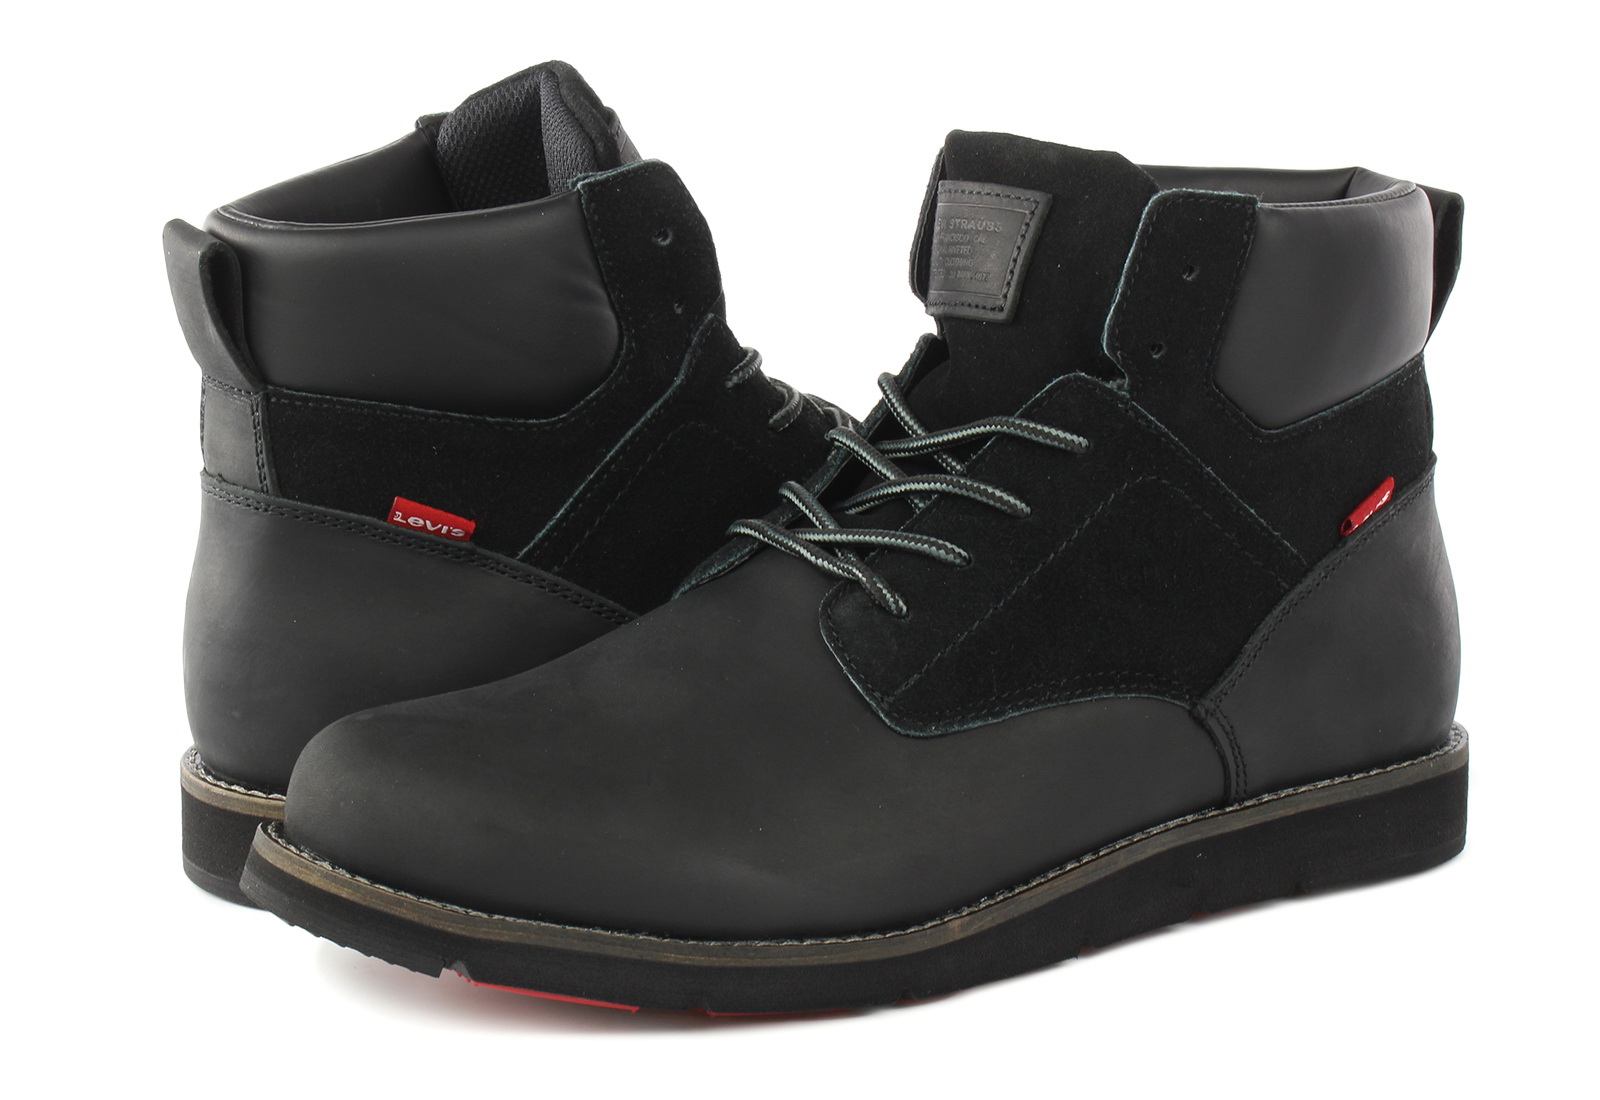 Levis High shoes - Jax Plus - 232198-1700-60 - Online shop for sneakers,  shoes and boots